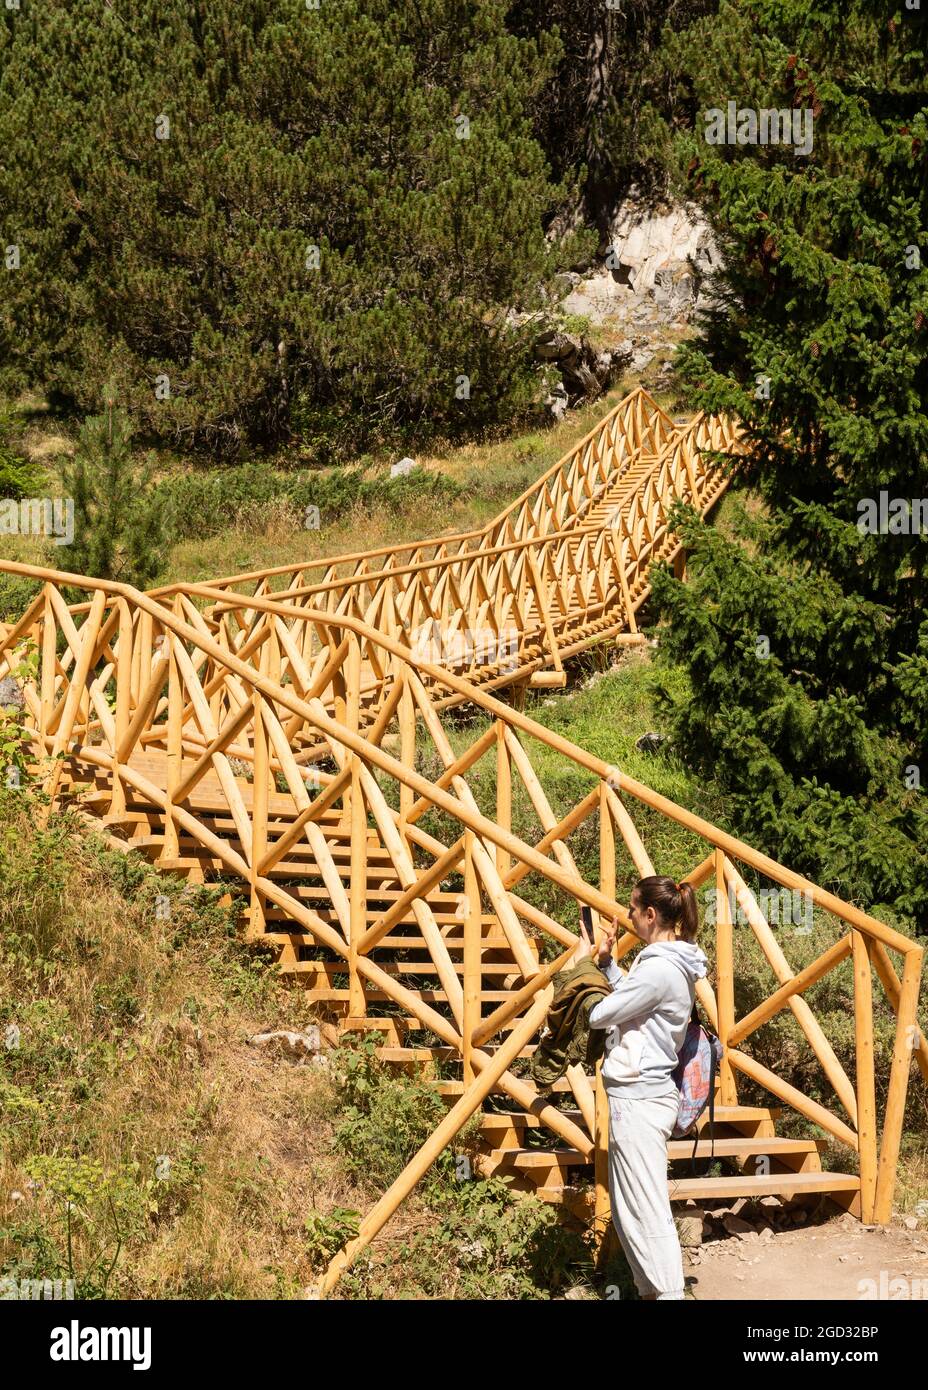 Newly built designated steep stairs of wooden boardwalk in Pirin National Park and Reserve, Pirin Mountain, Bulgaria, Balkans, Europe Stock Photo